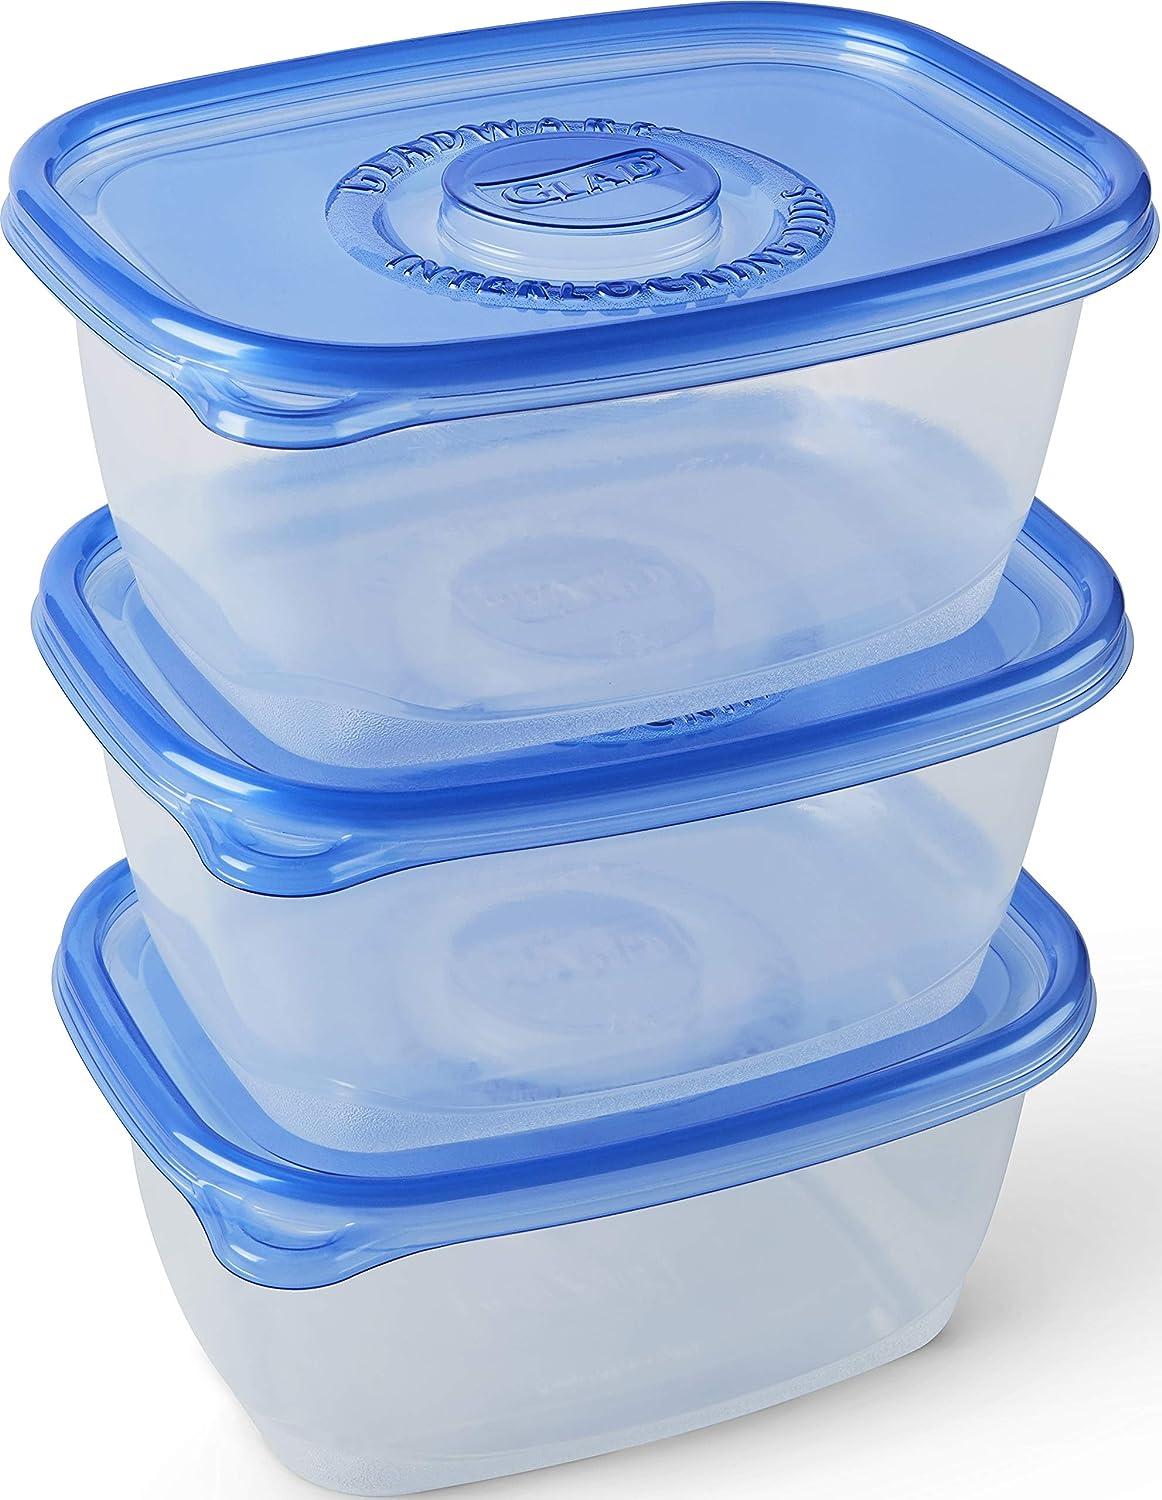 Glad Food Storage Containers, Deep Dish, 64 Ounce, 3 Count